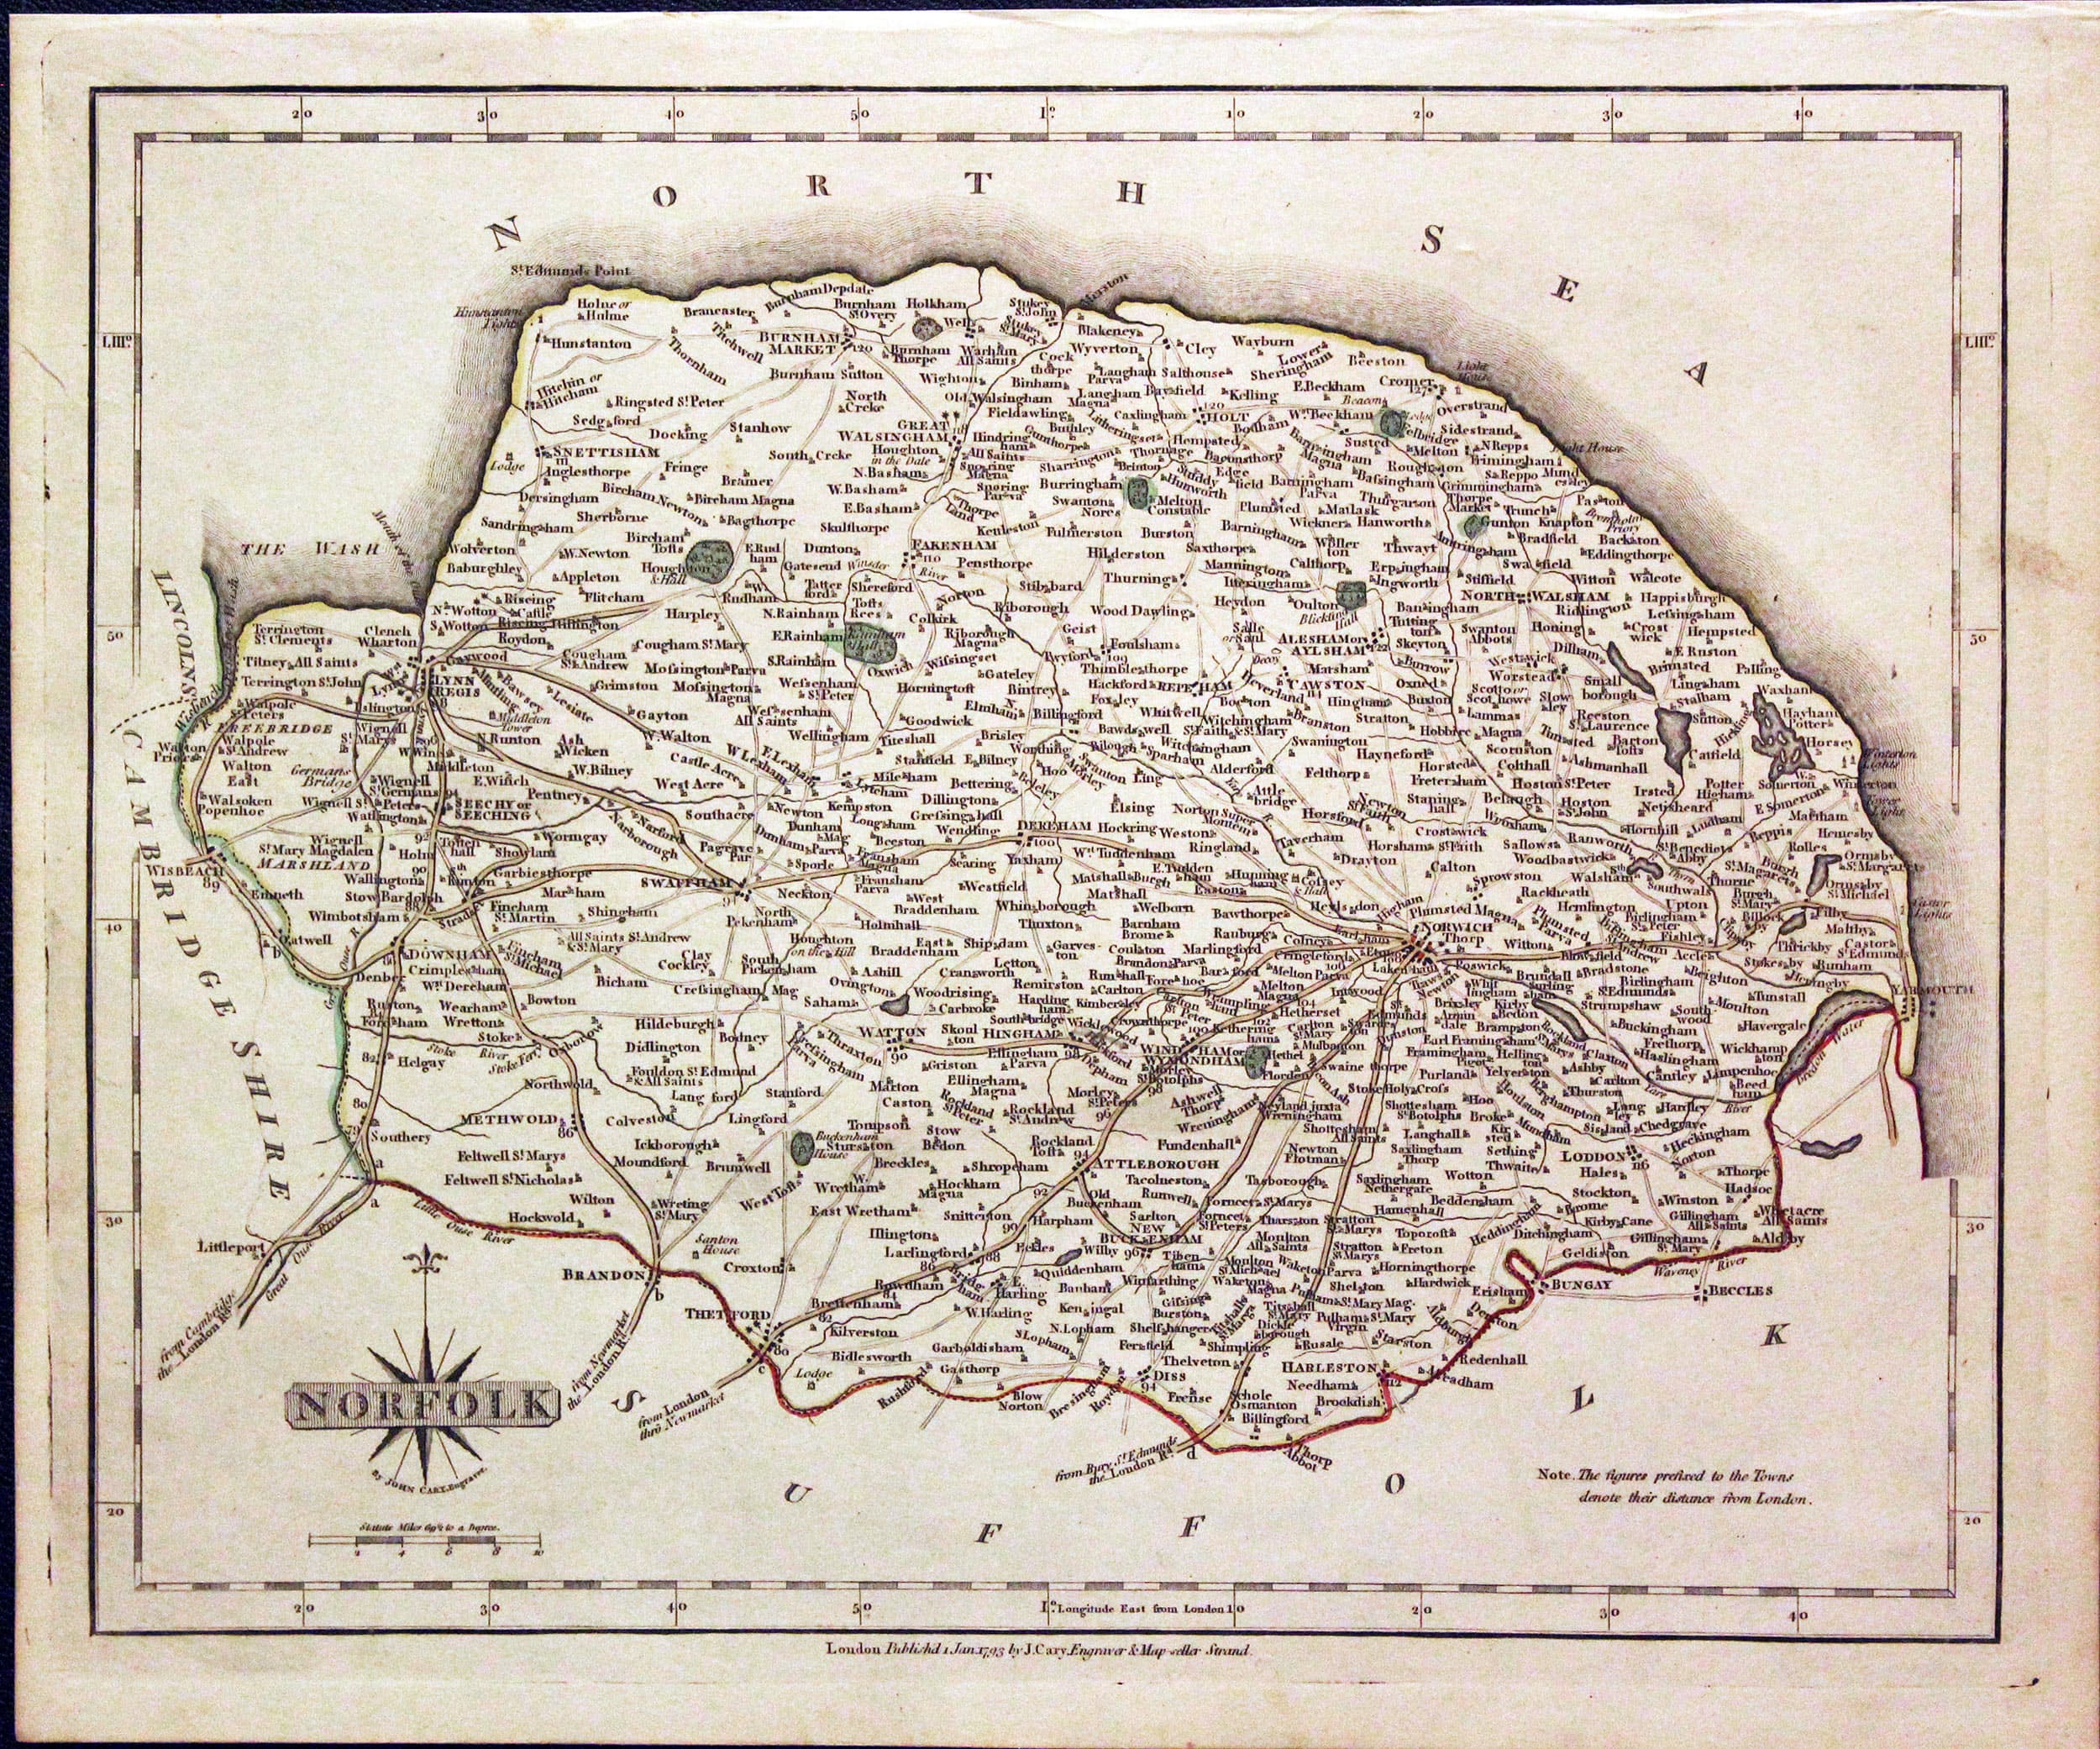 Map of Norfolk by John Cary